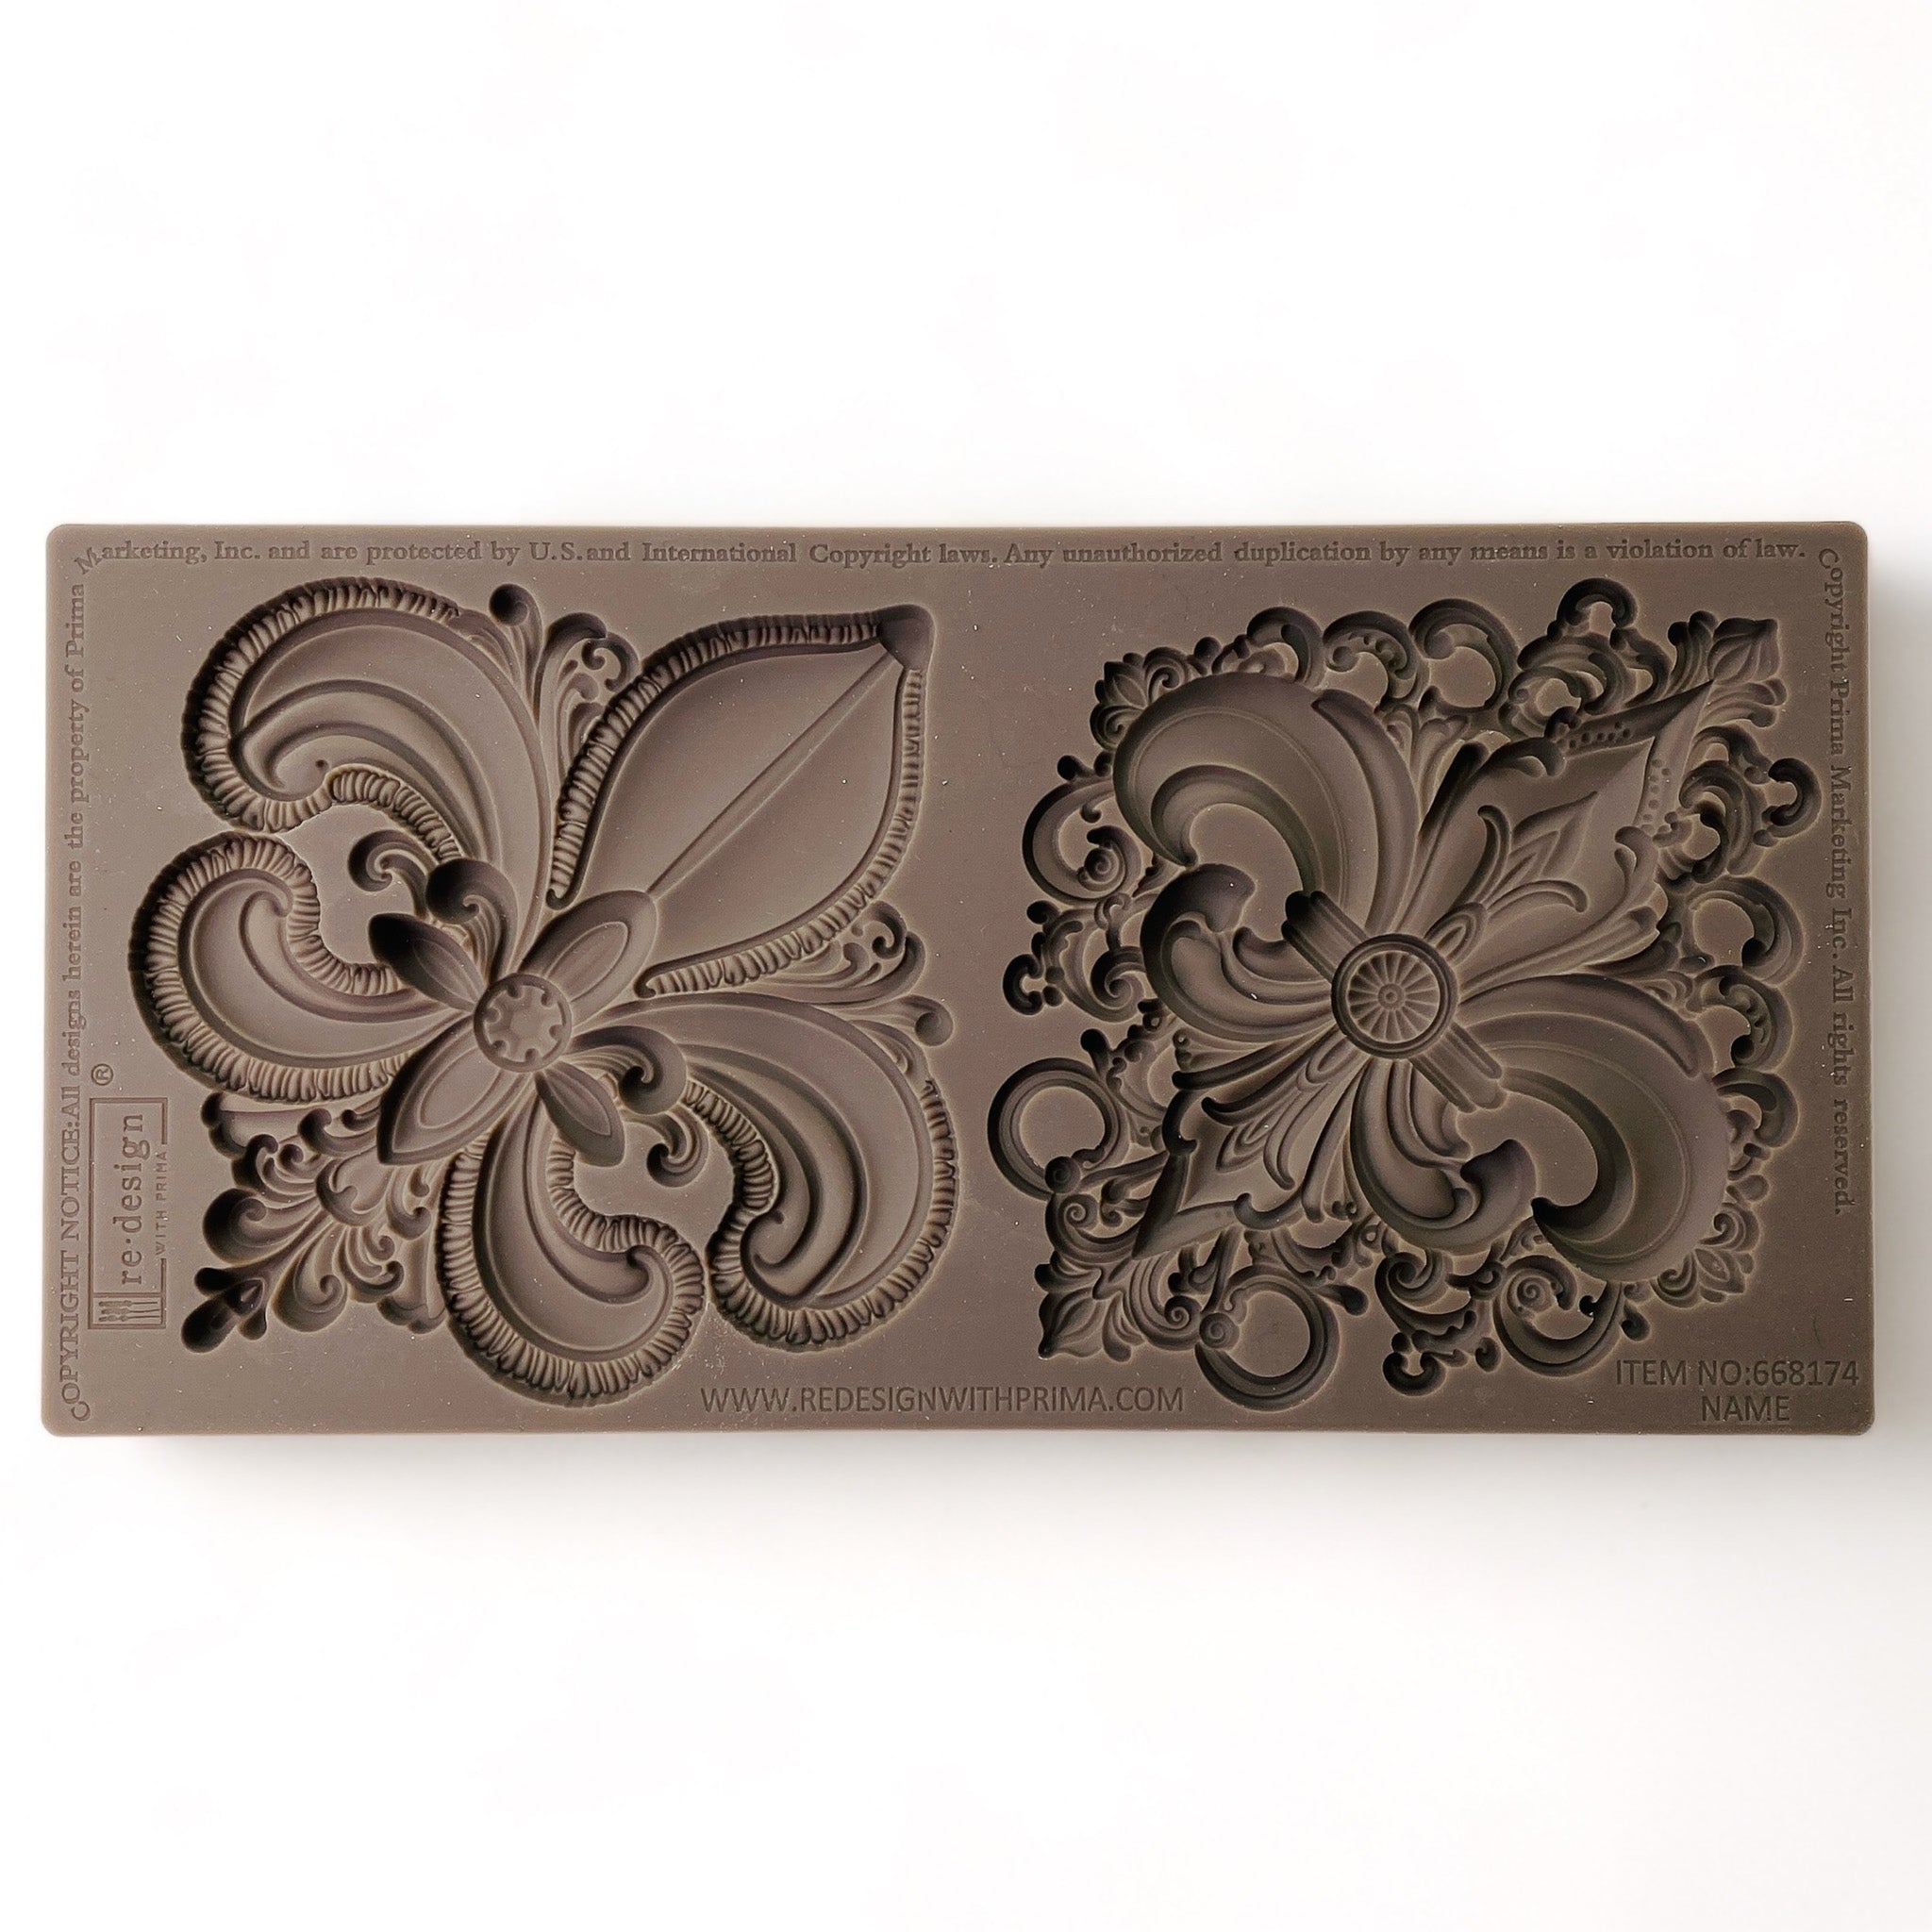 A brown silicone mold of 2 large ornate Fleur de Lis designs is against a white background.